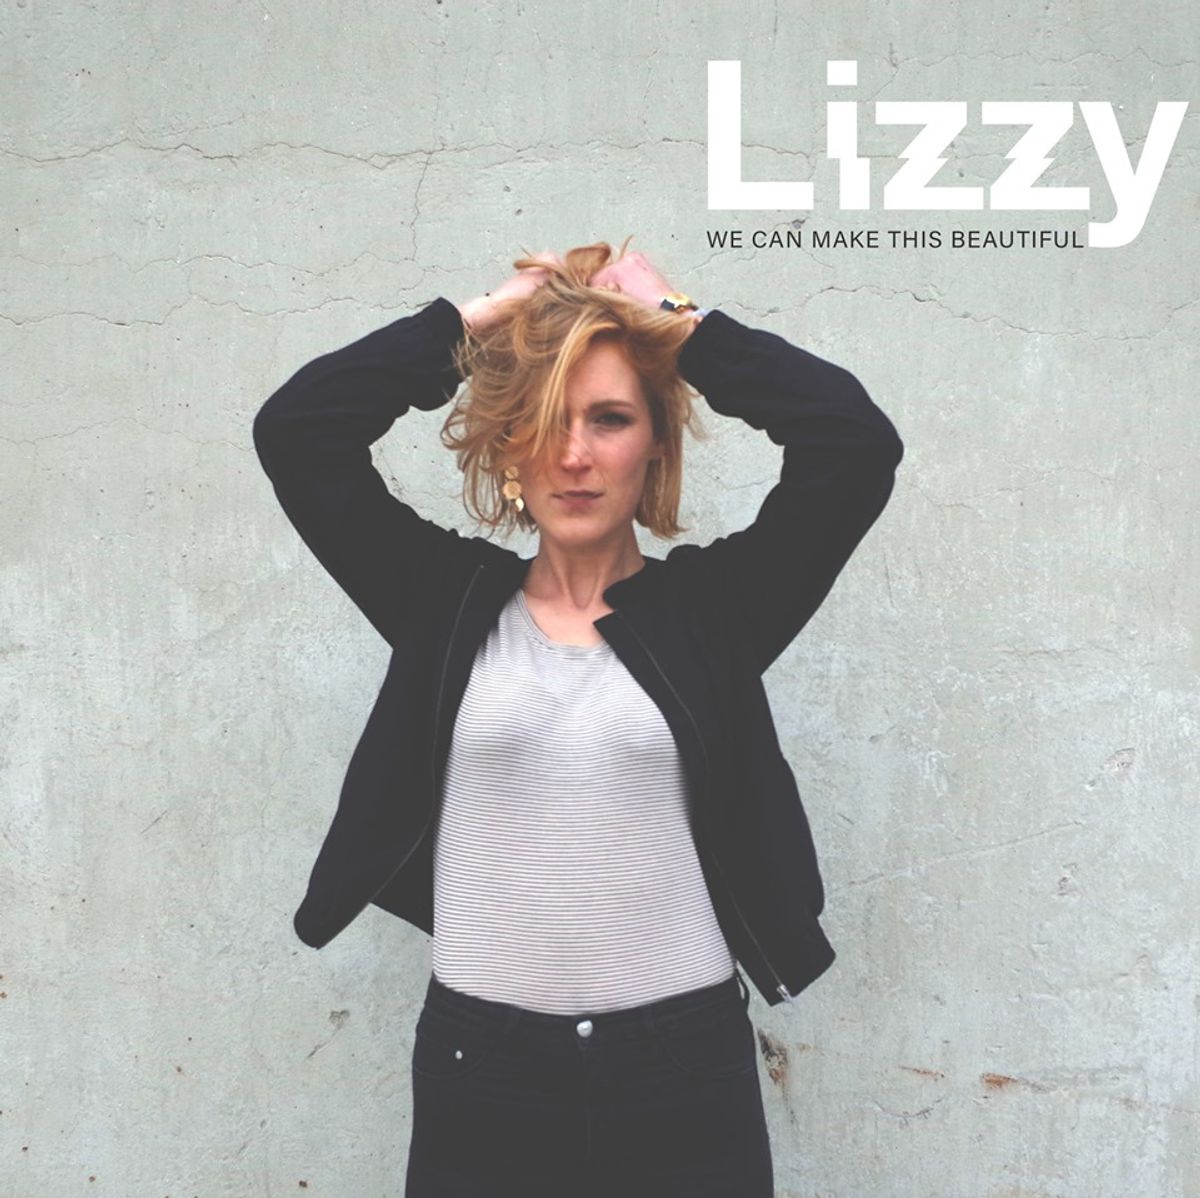 Lizzy - We can make this beautiful